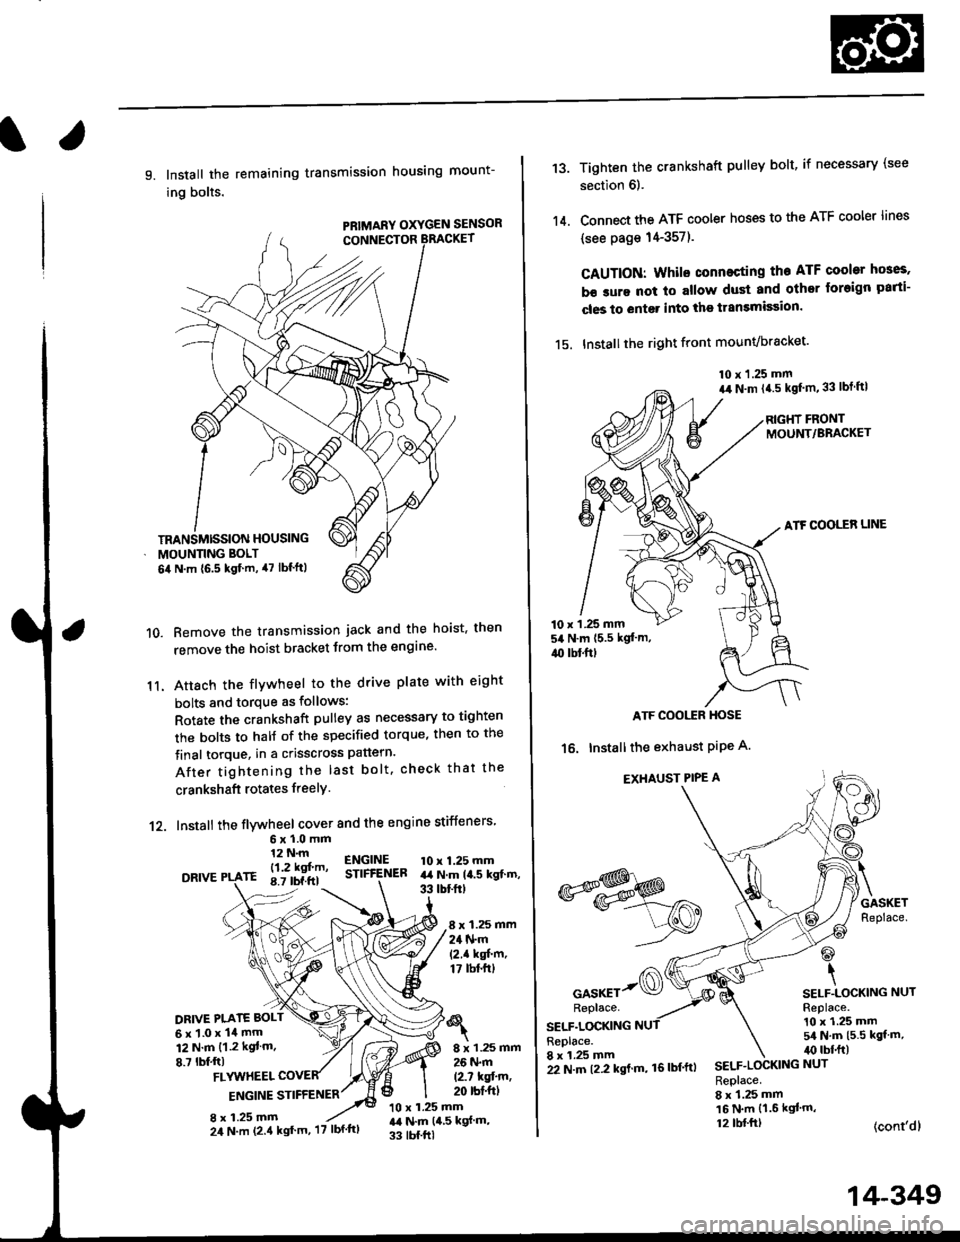 HONDA CIVIC 1996 6.G Workshop Manual l.
9. Install the remaining transmission housing mount-
ing bolts.
PRIMARY OXYGEN SENSOR
Remove the transmission jack and the hoist. then
remove the hoist bracket from the engine
Attach the flvwheel 